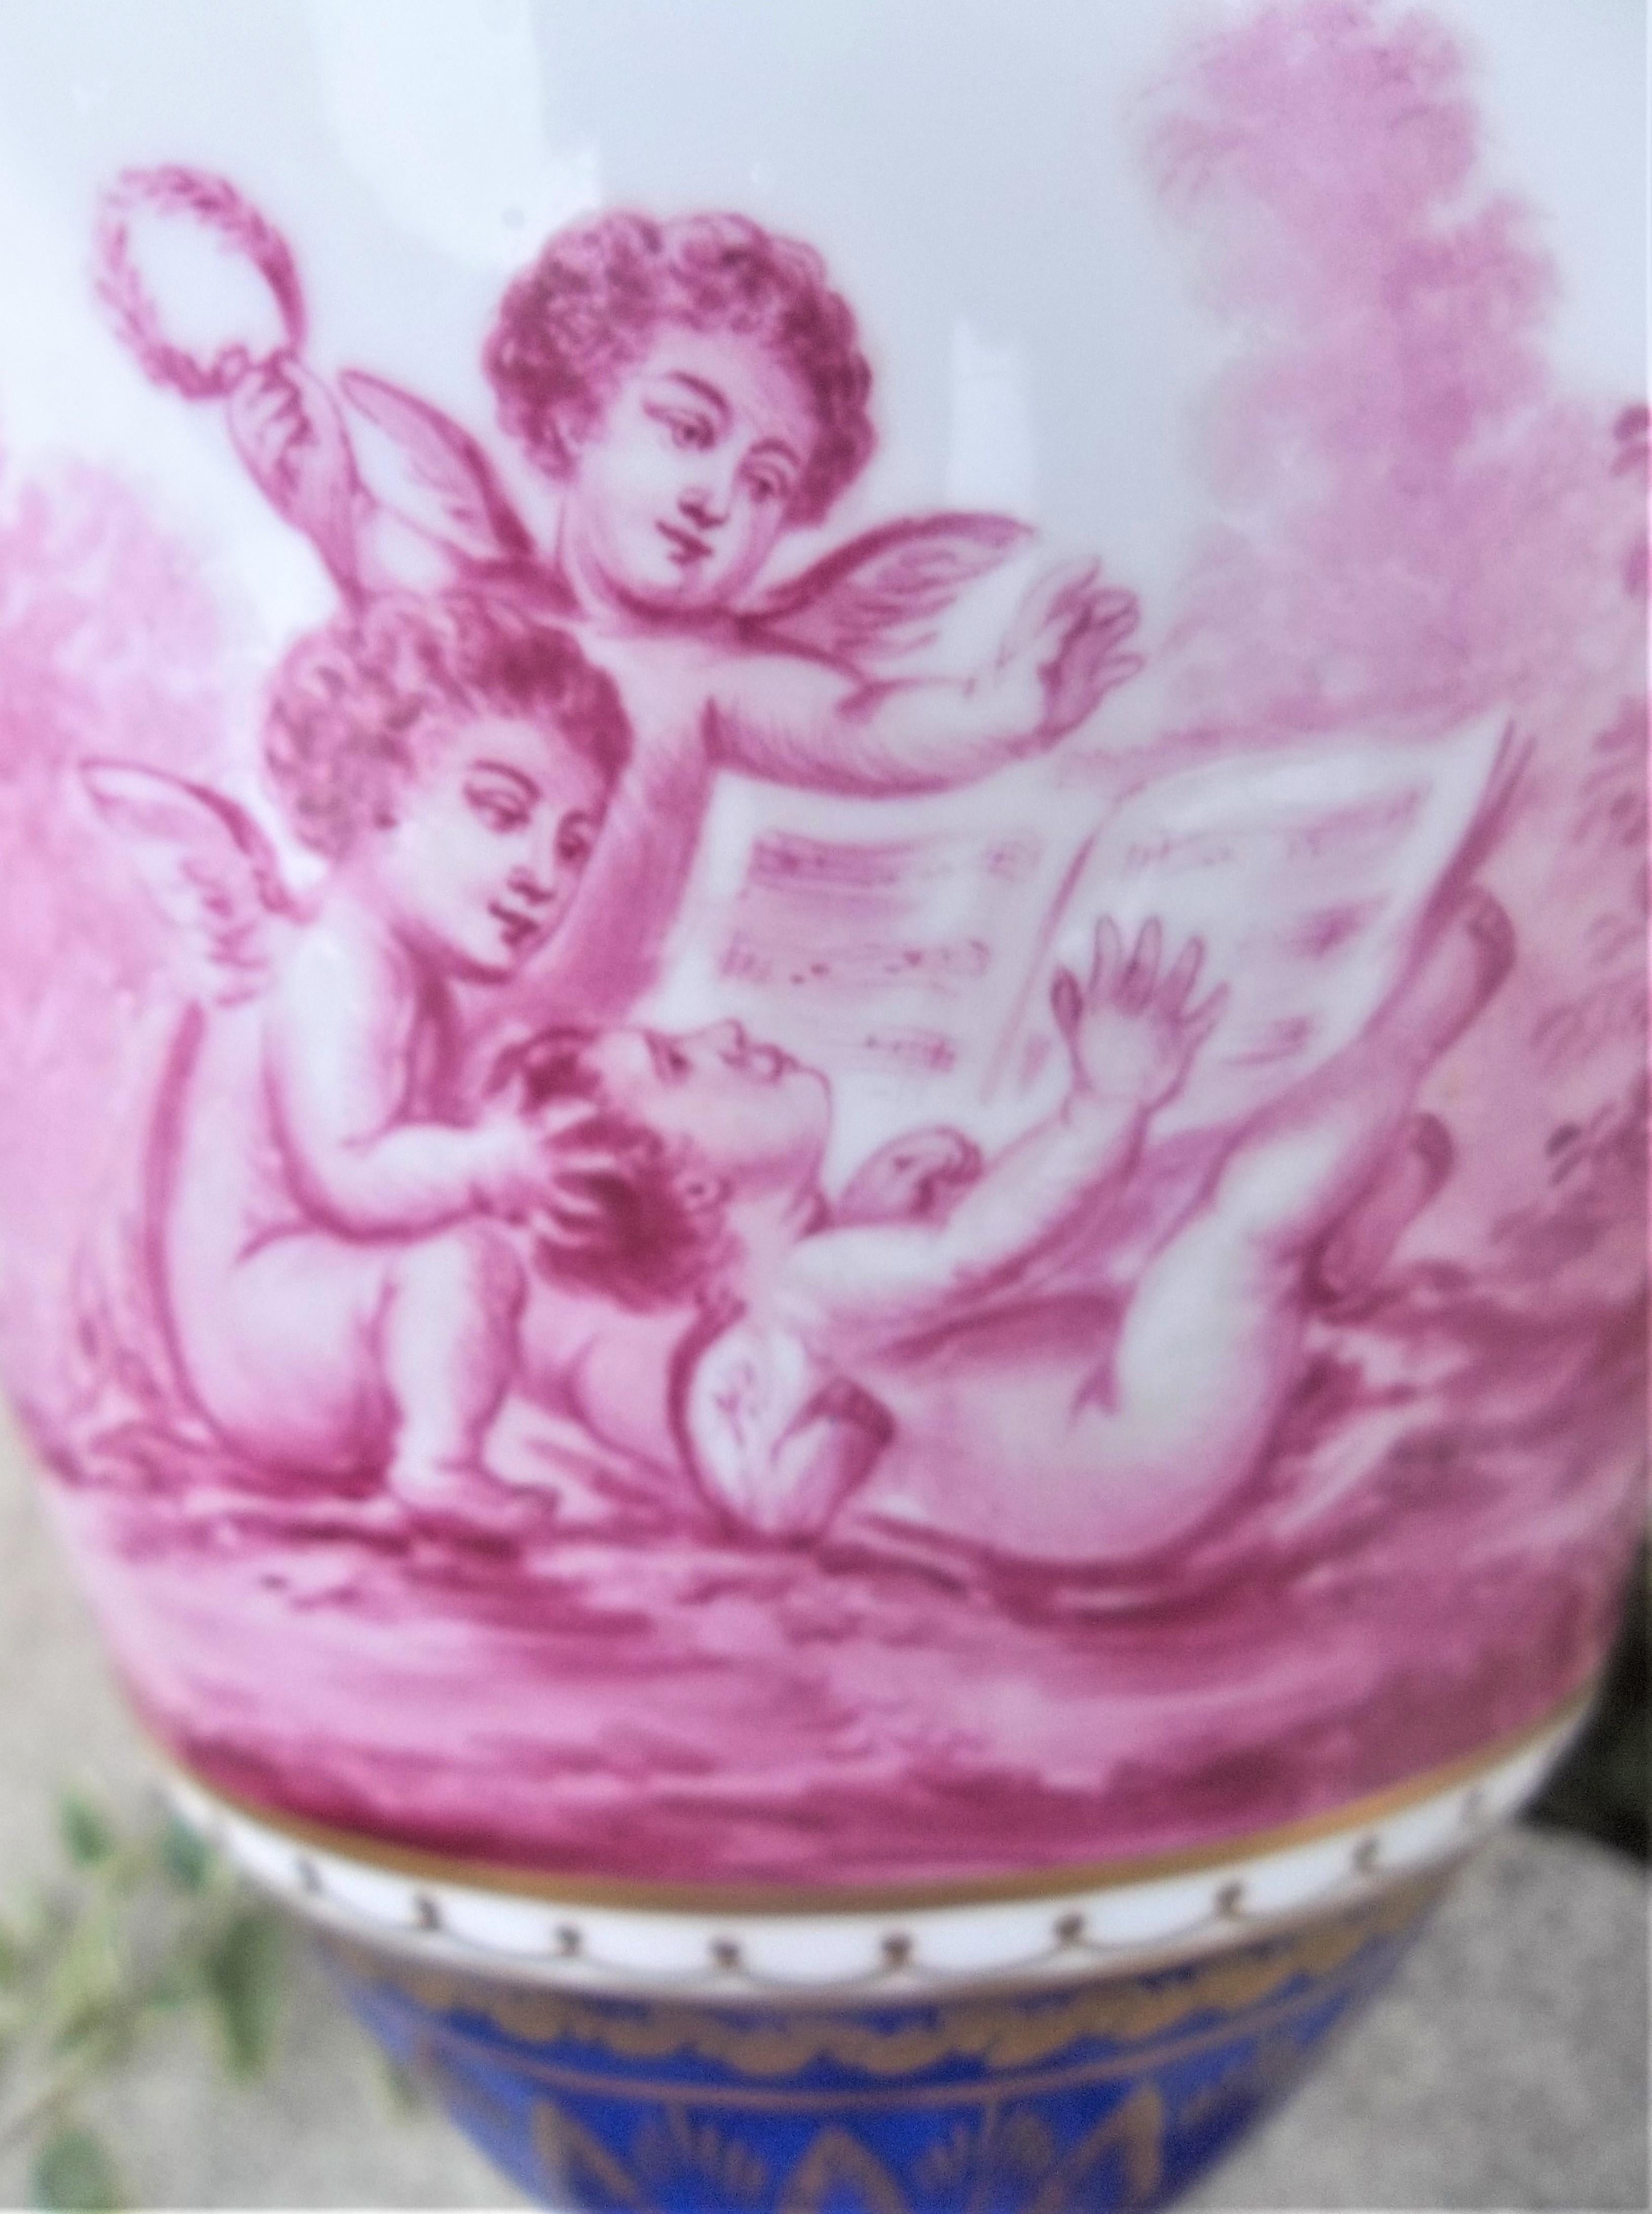 Sèvres-style Neoclassical Urn after Clodion , Putti or Cherubs  Frolicking  12